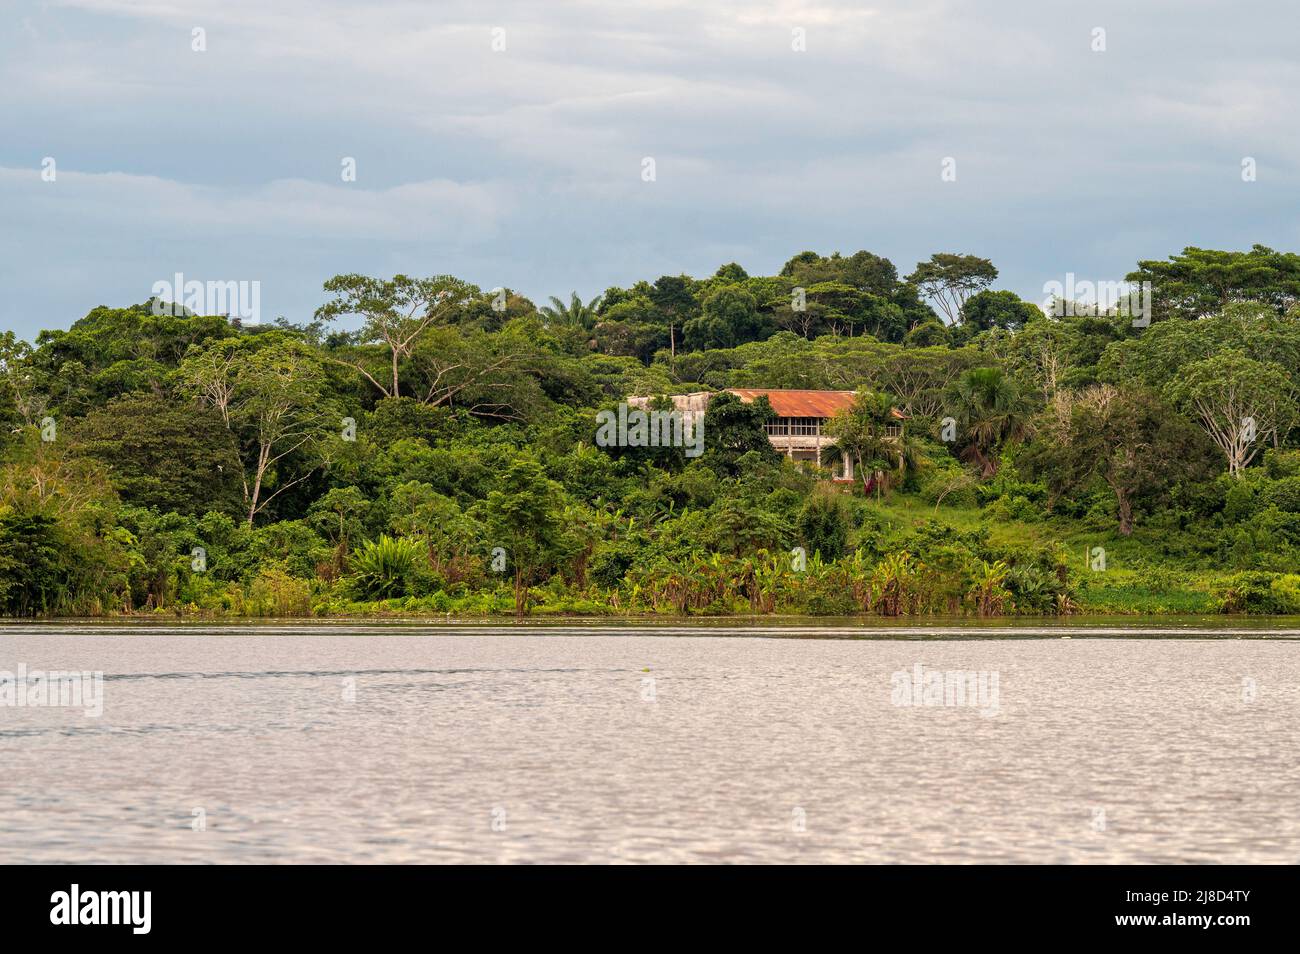 Old mansion from the Rubber Boom era on the Amazon River in Peru Stock Photo